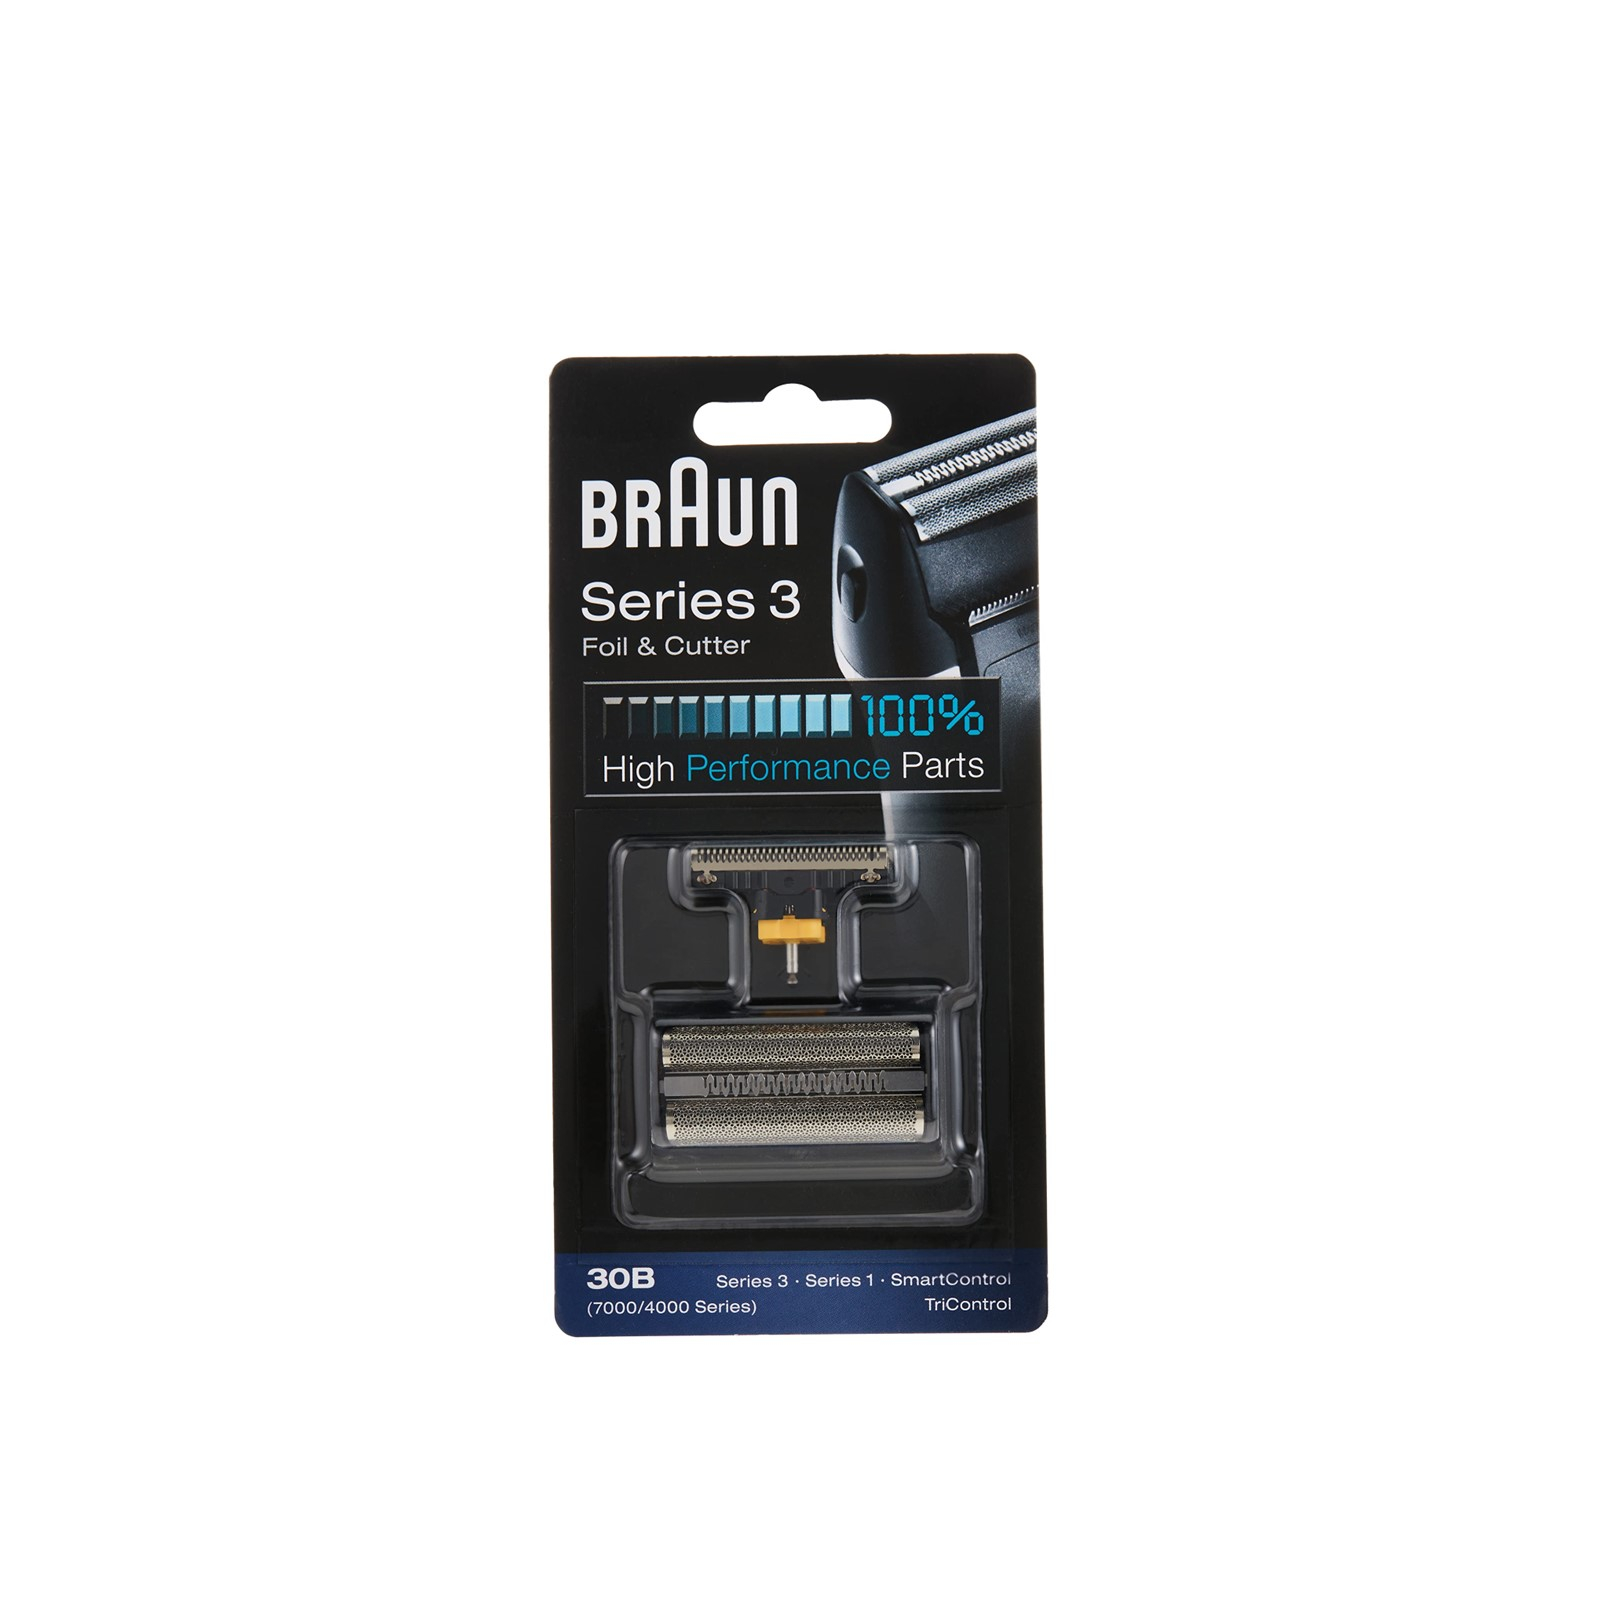 30b Series 3 Replacement Shaver Foil Compatible With Braun Series